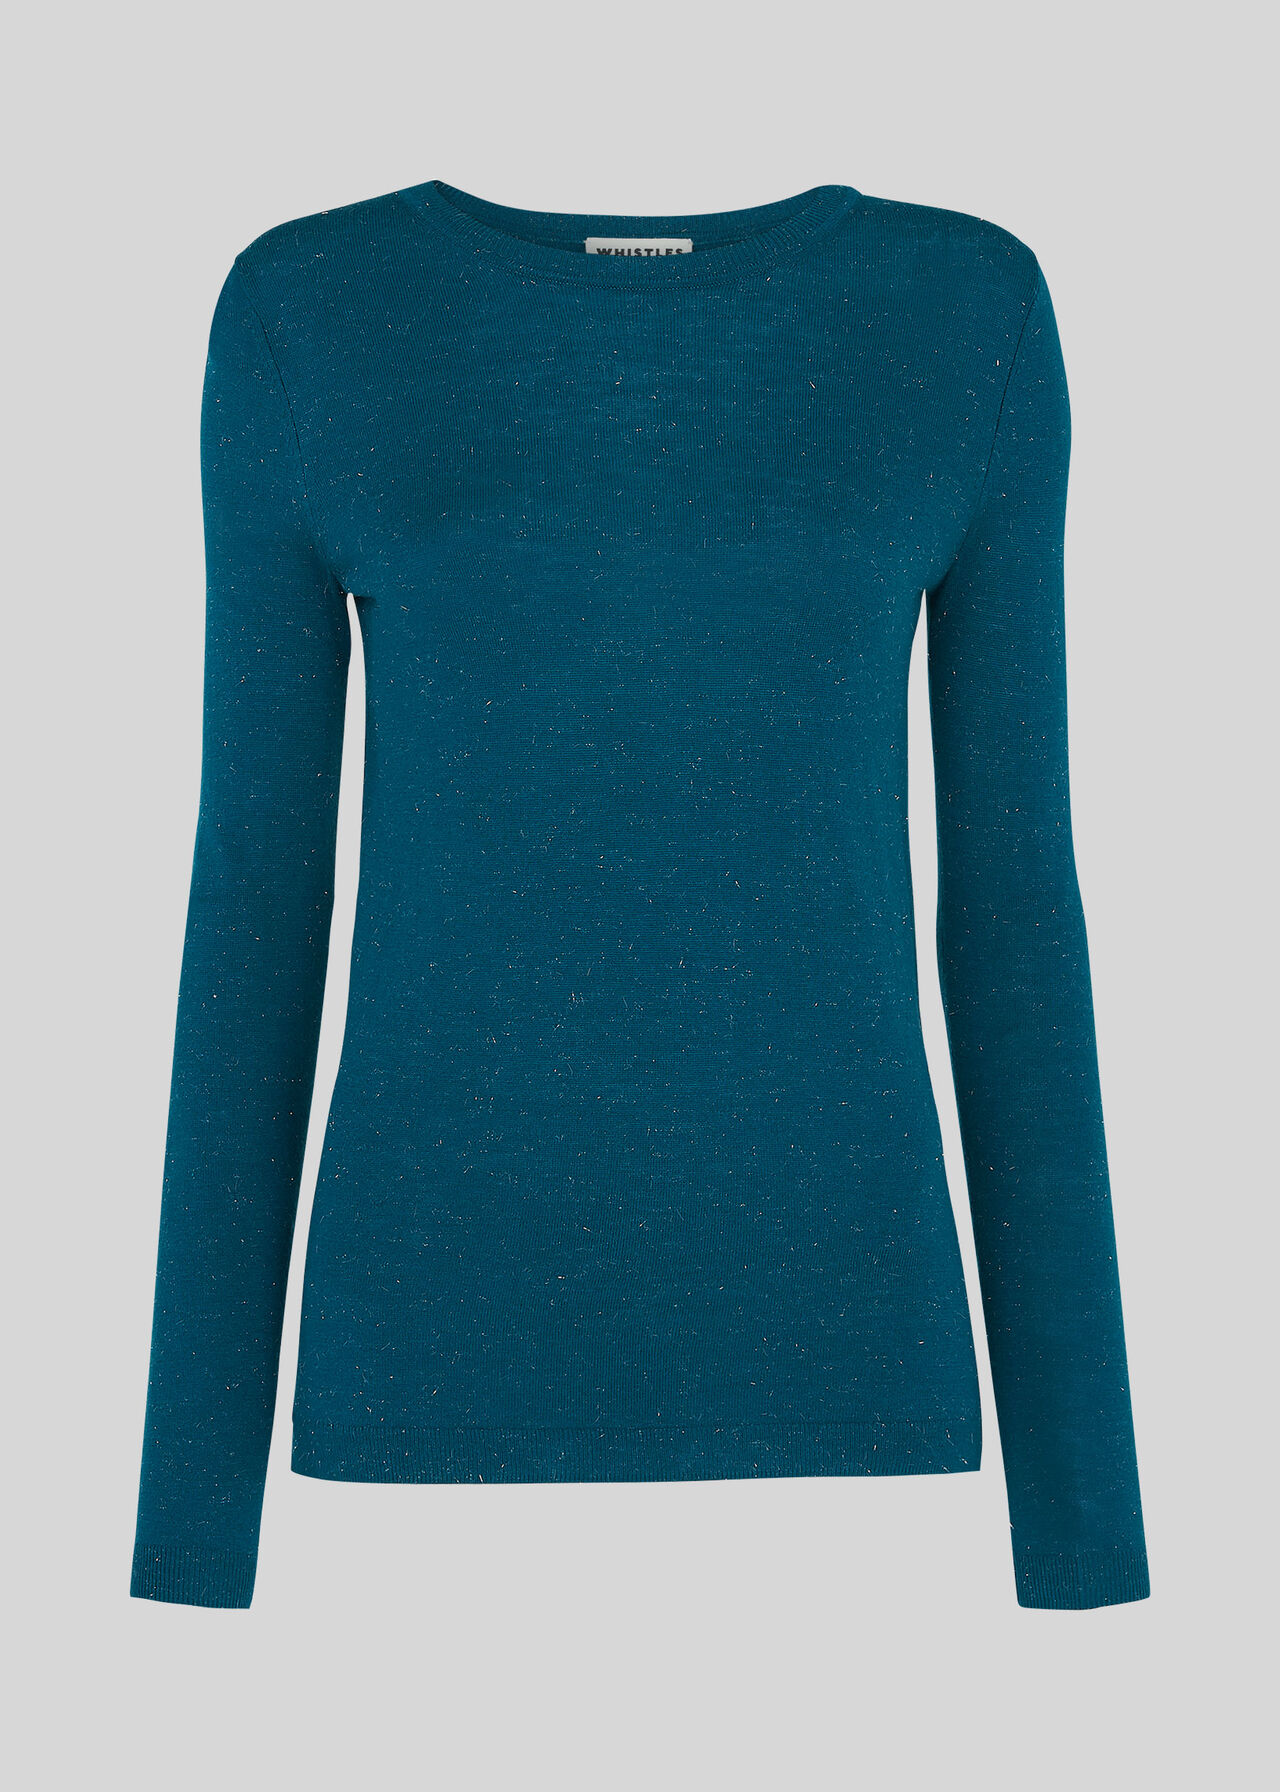 Teal Annie Sparkle Knit | WHISTLES